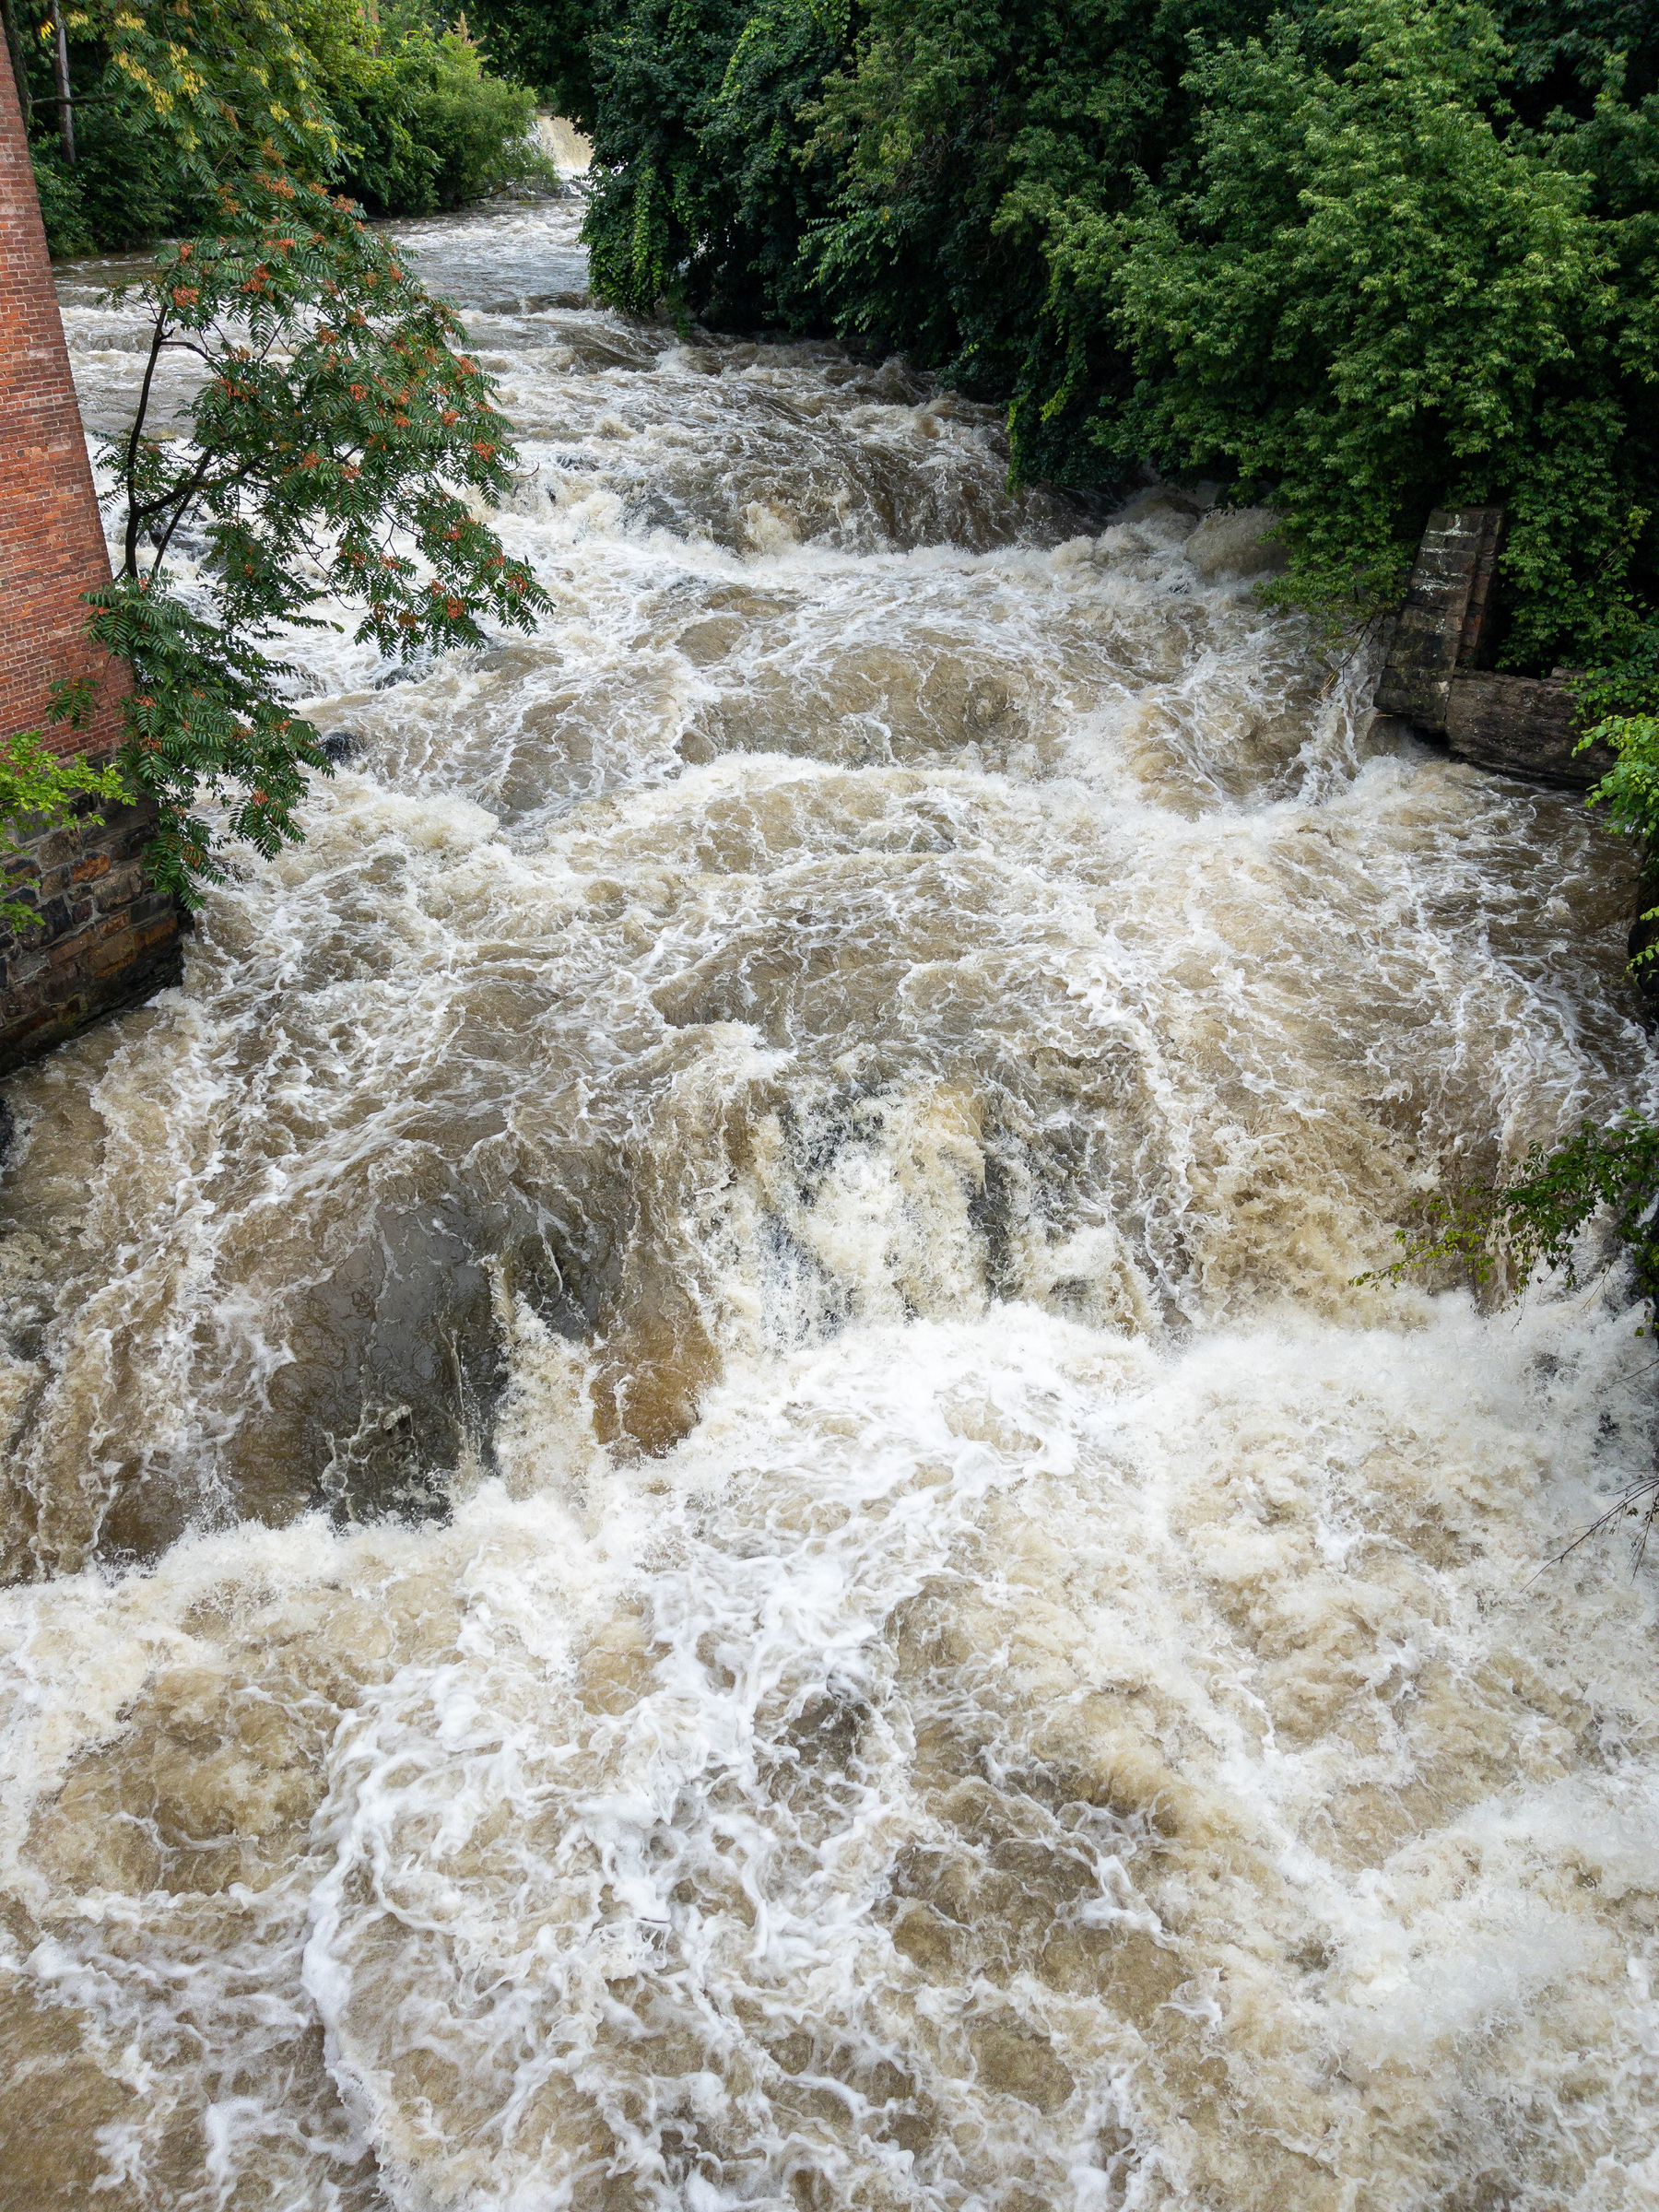 Rapids in local creek after heavy rains.